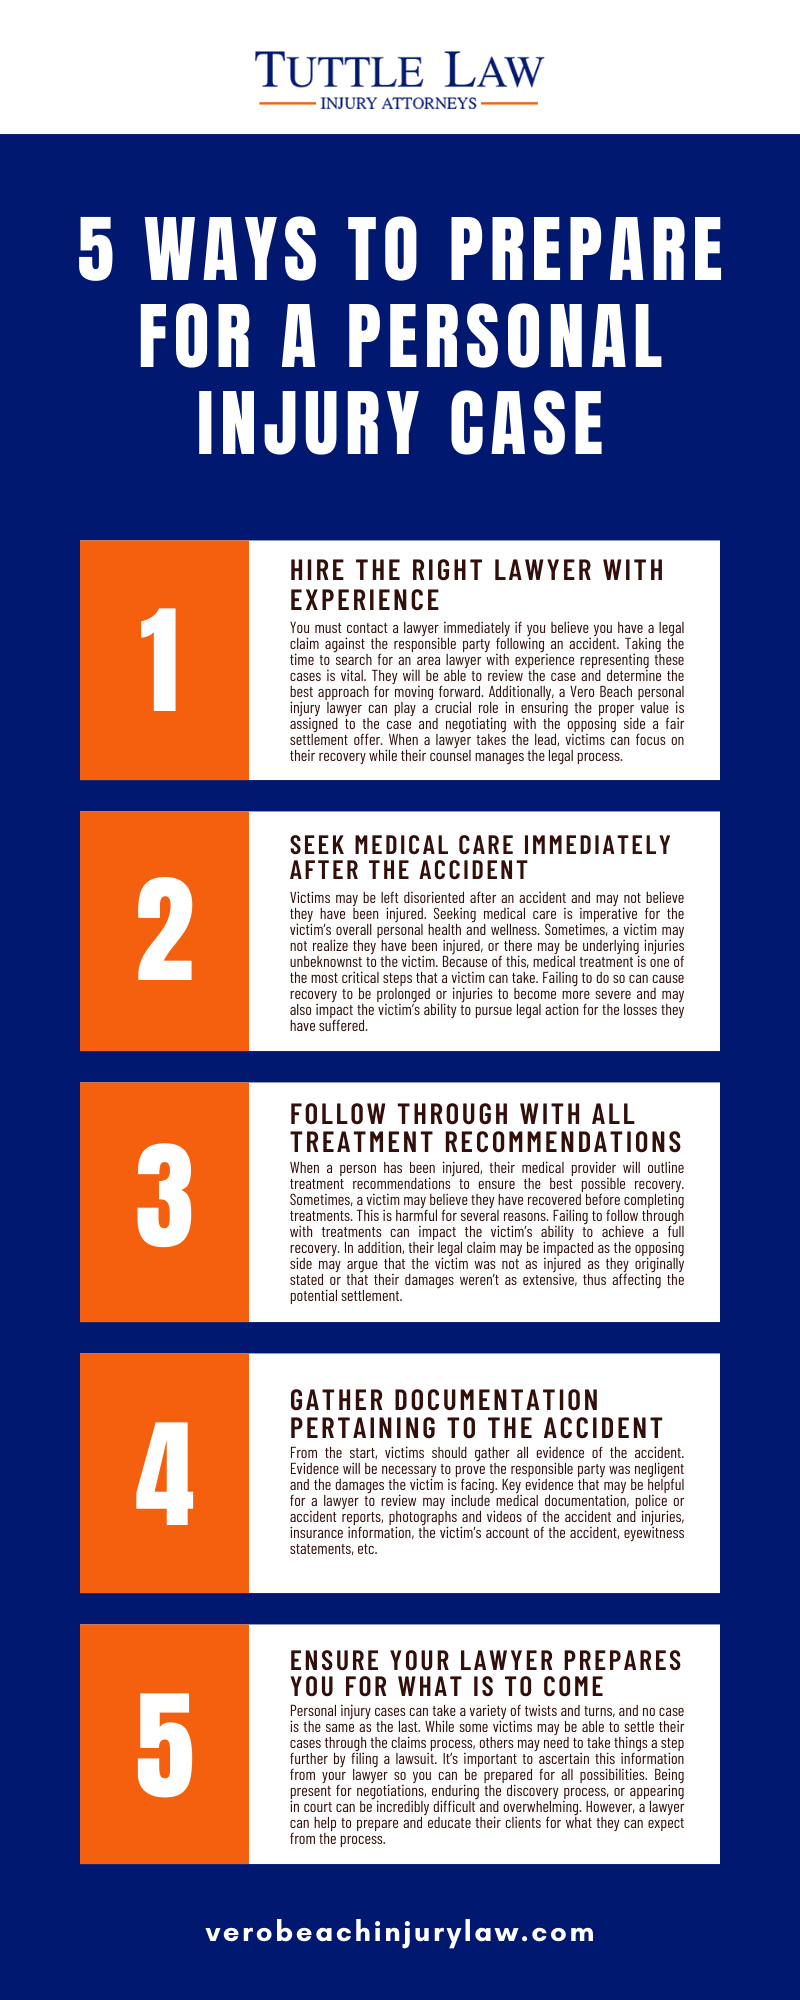 5 WAYS TO PREPARE FOR A PERSONAL INJURY CASE INFOGRAPHIC